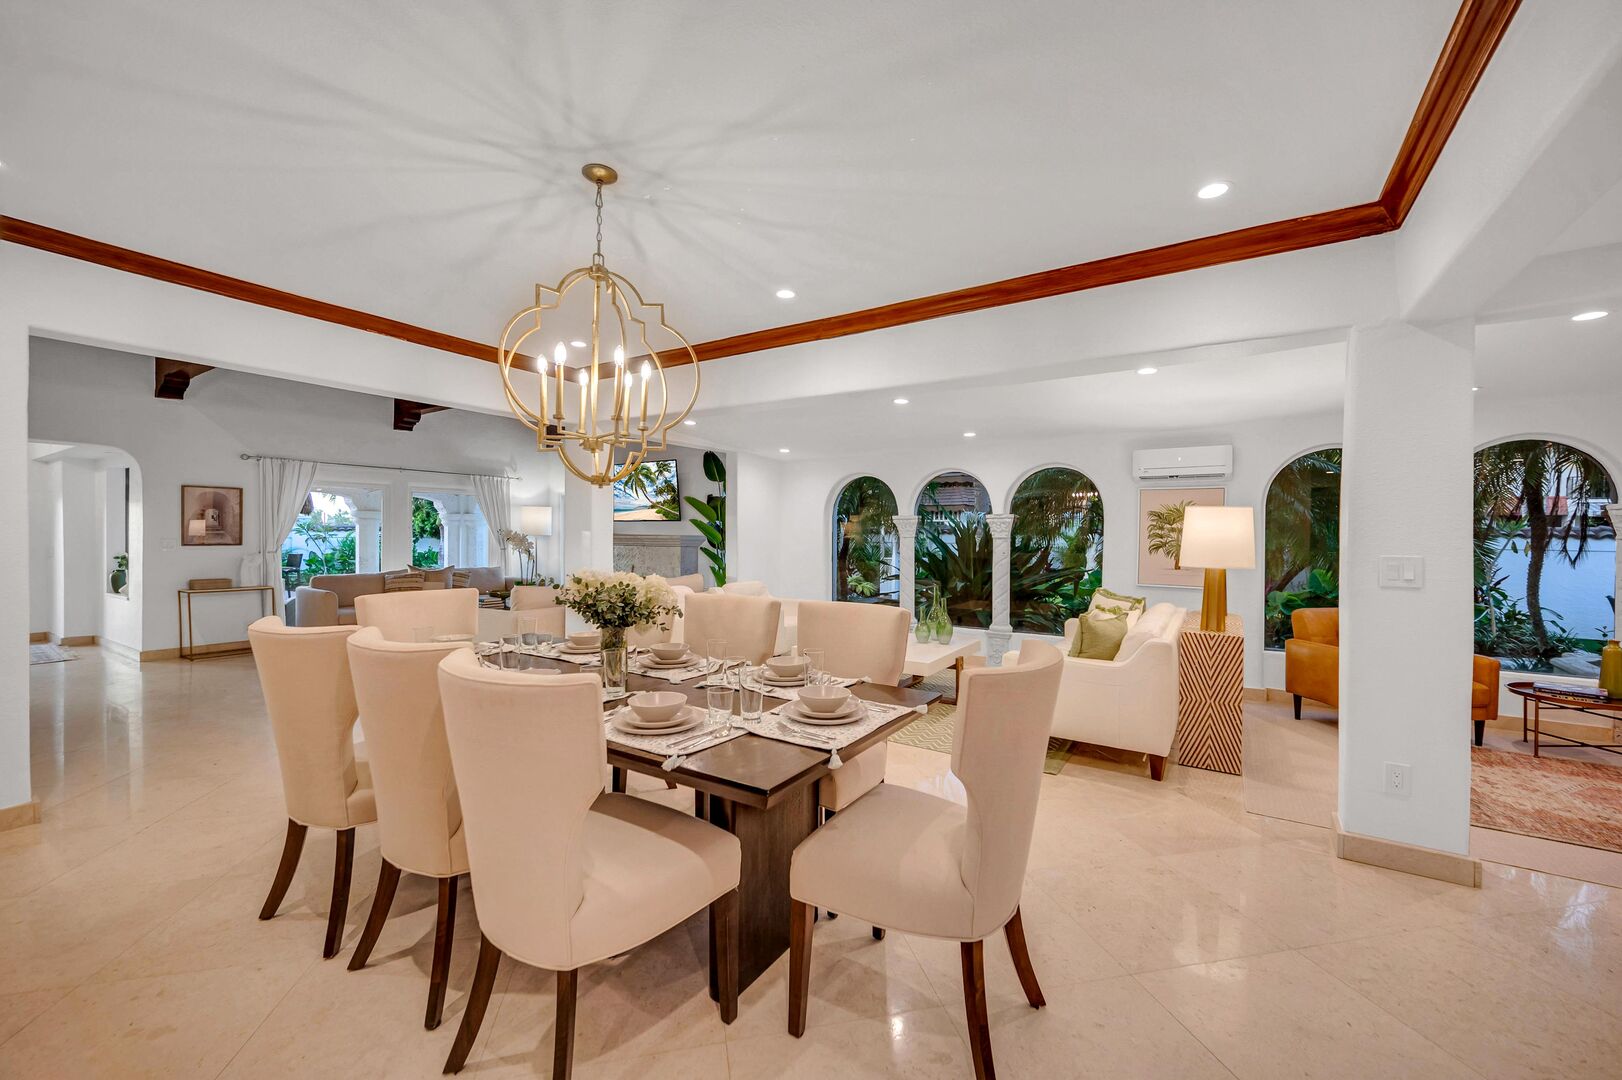 The dinning area, located in the middle of the open-concept living area sits eight.